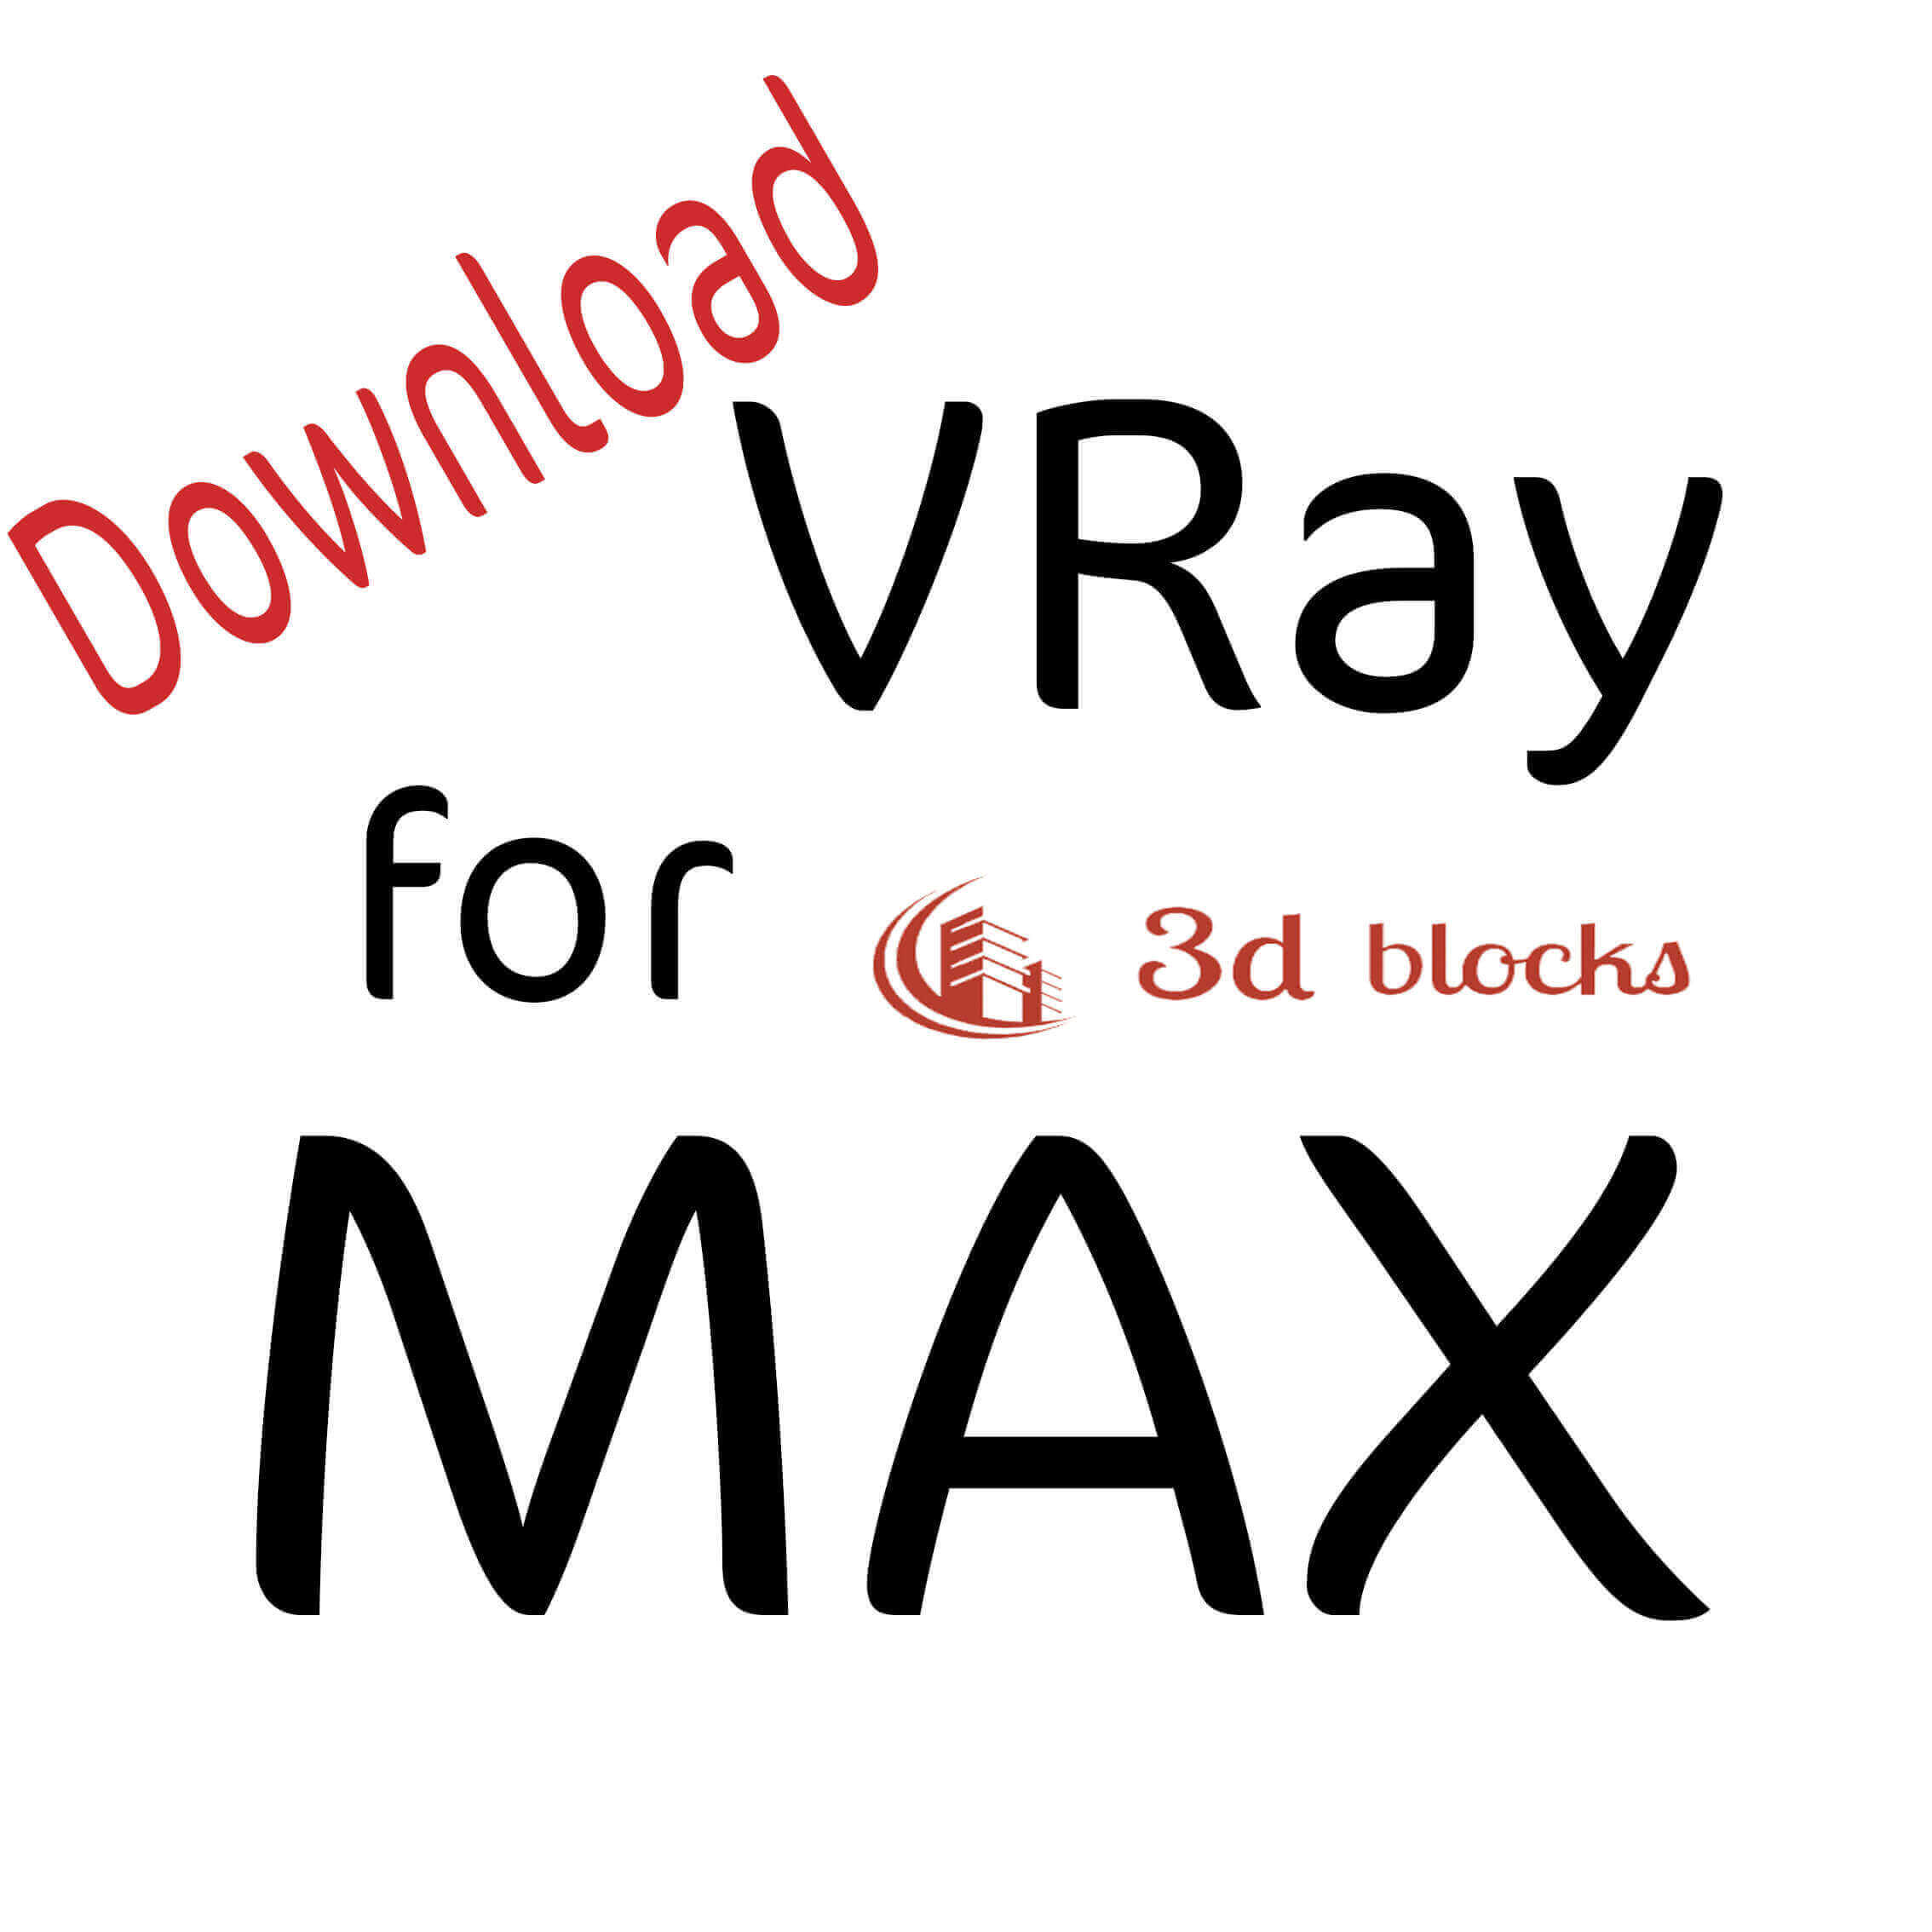 vray 3ds max 2013 32 bits